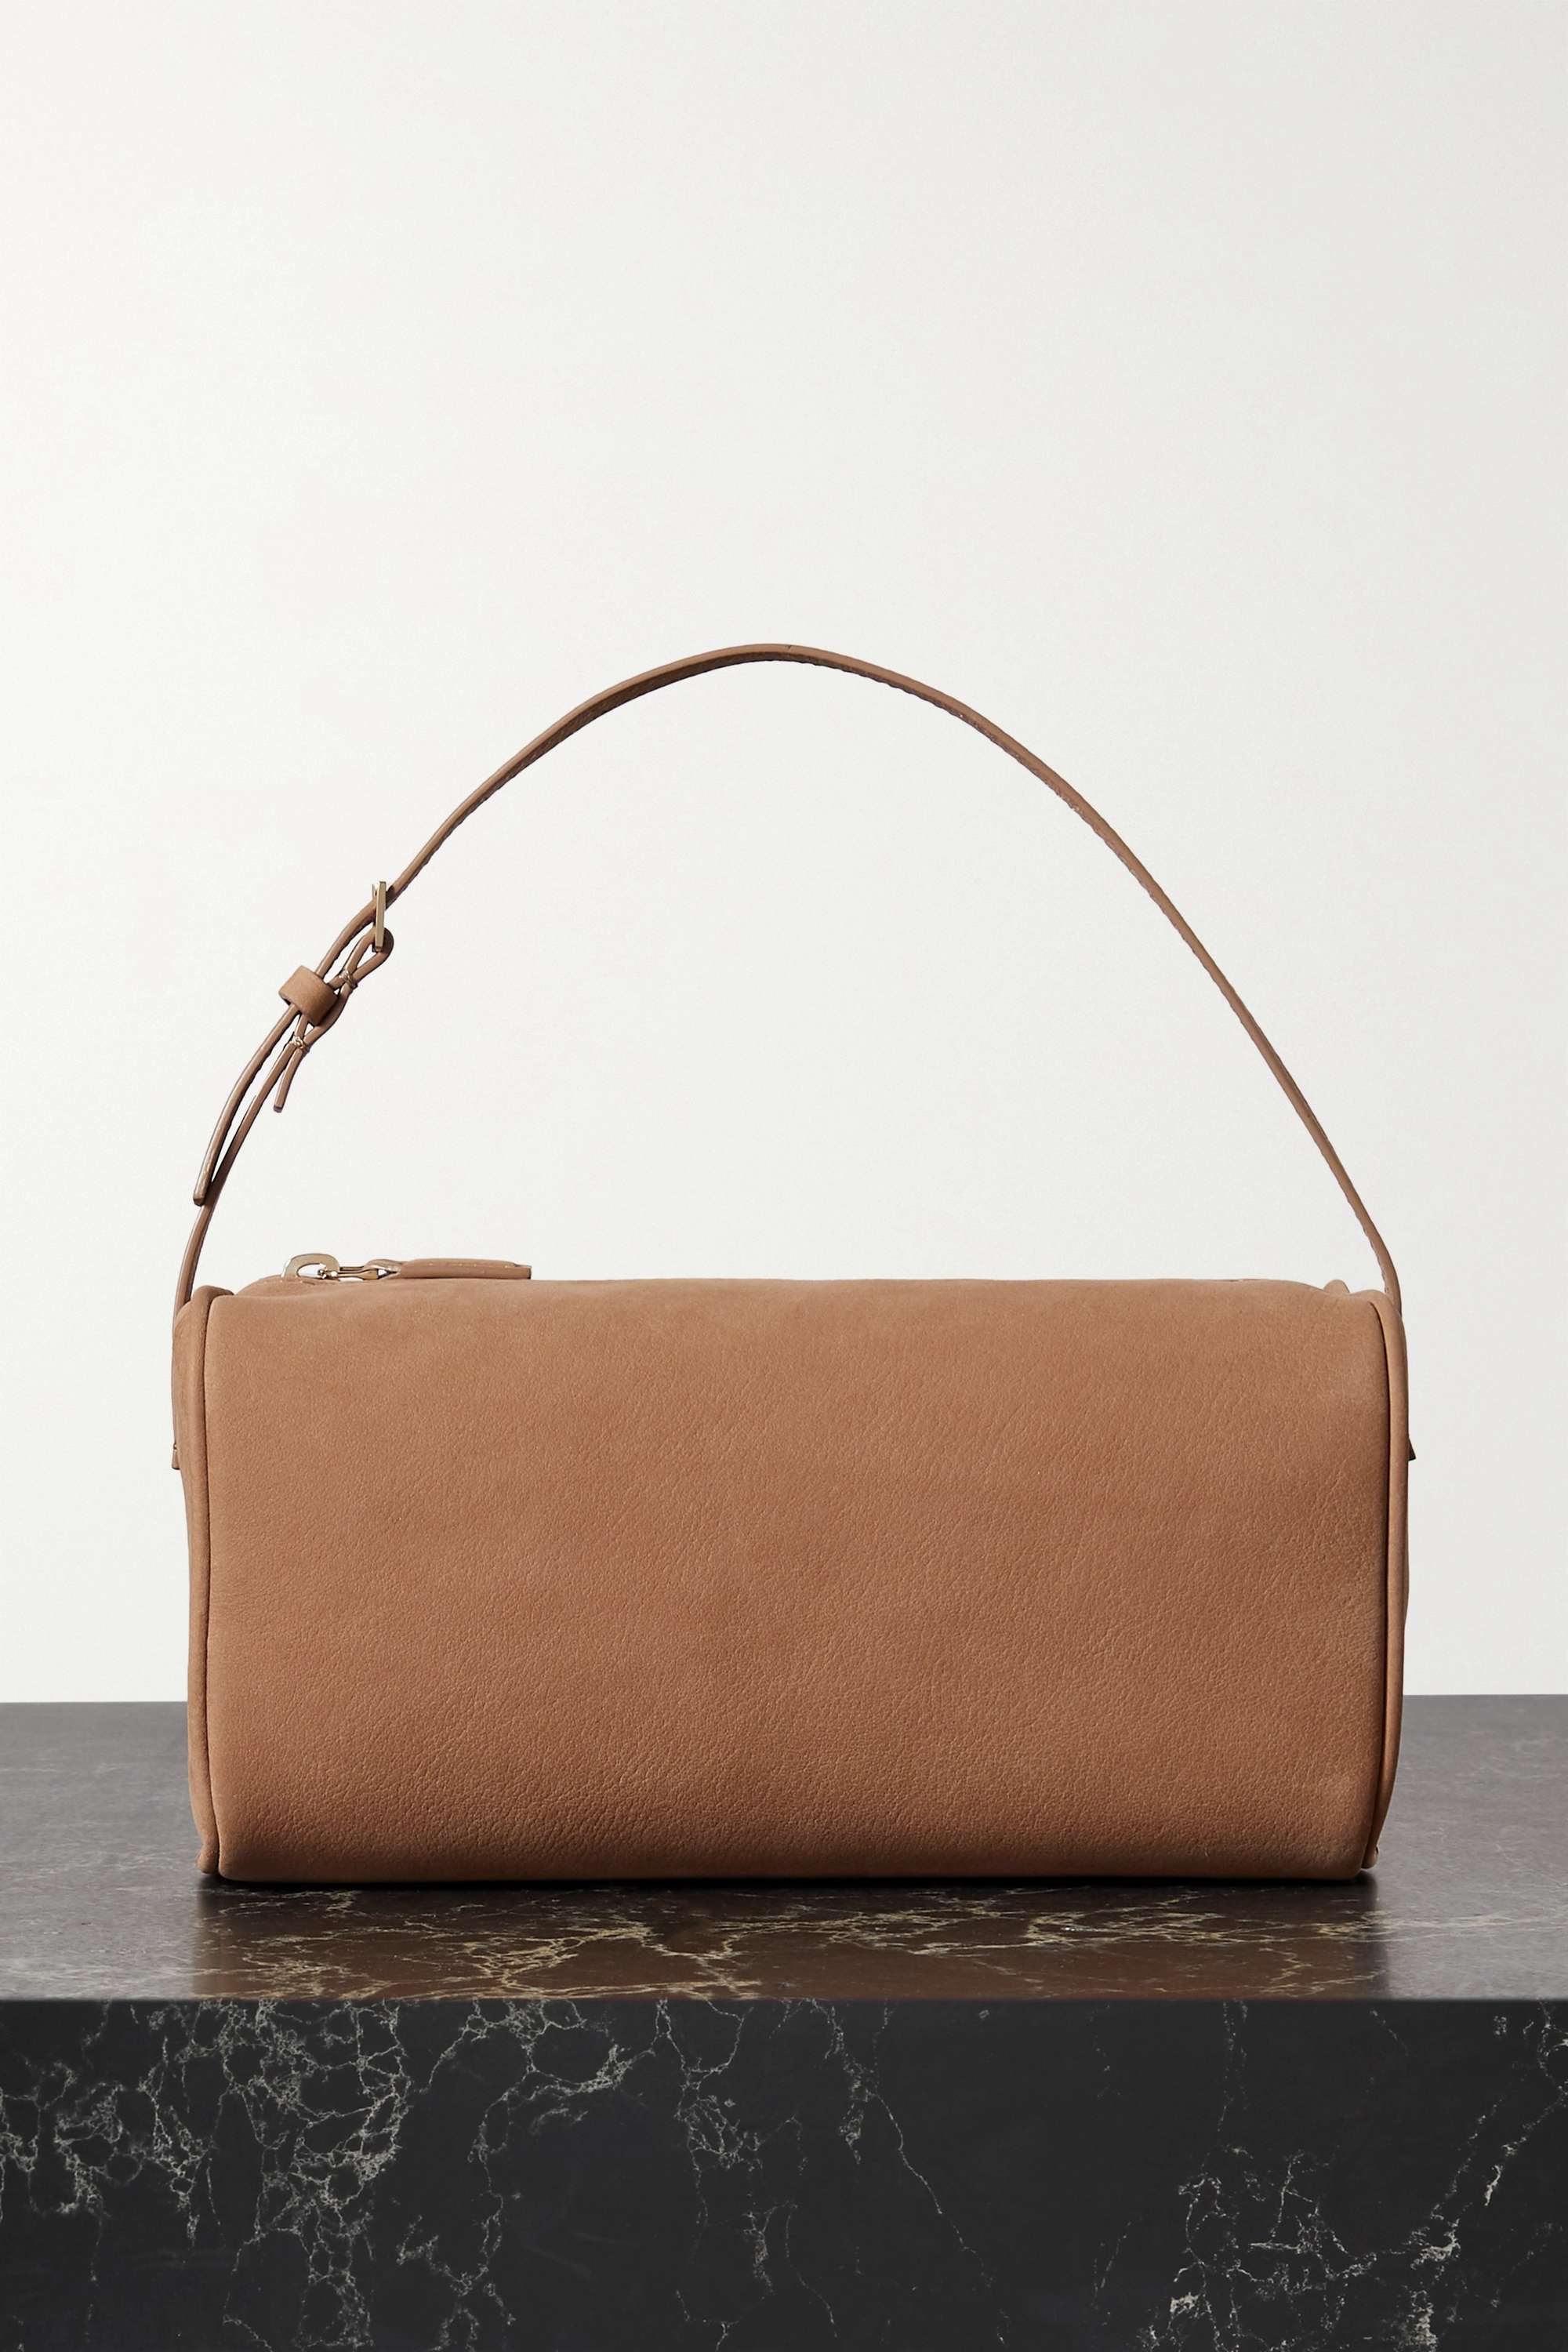 10 Underrated Designer Bags You Should Know About - luxfy